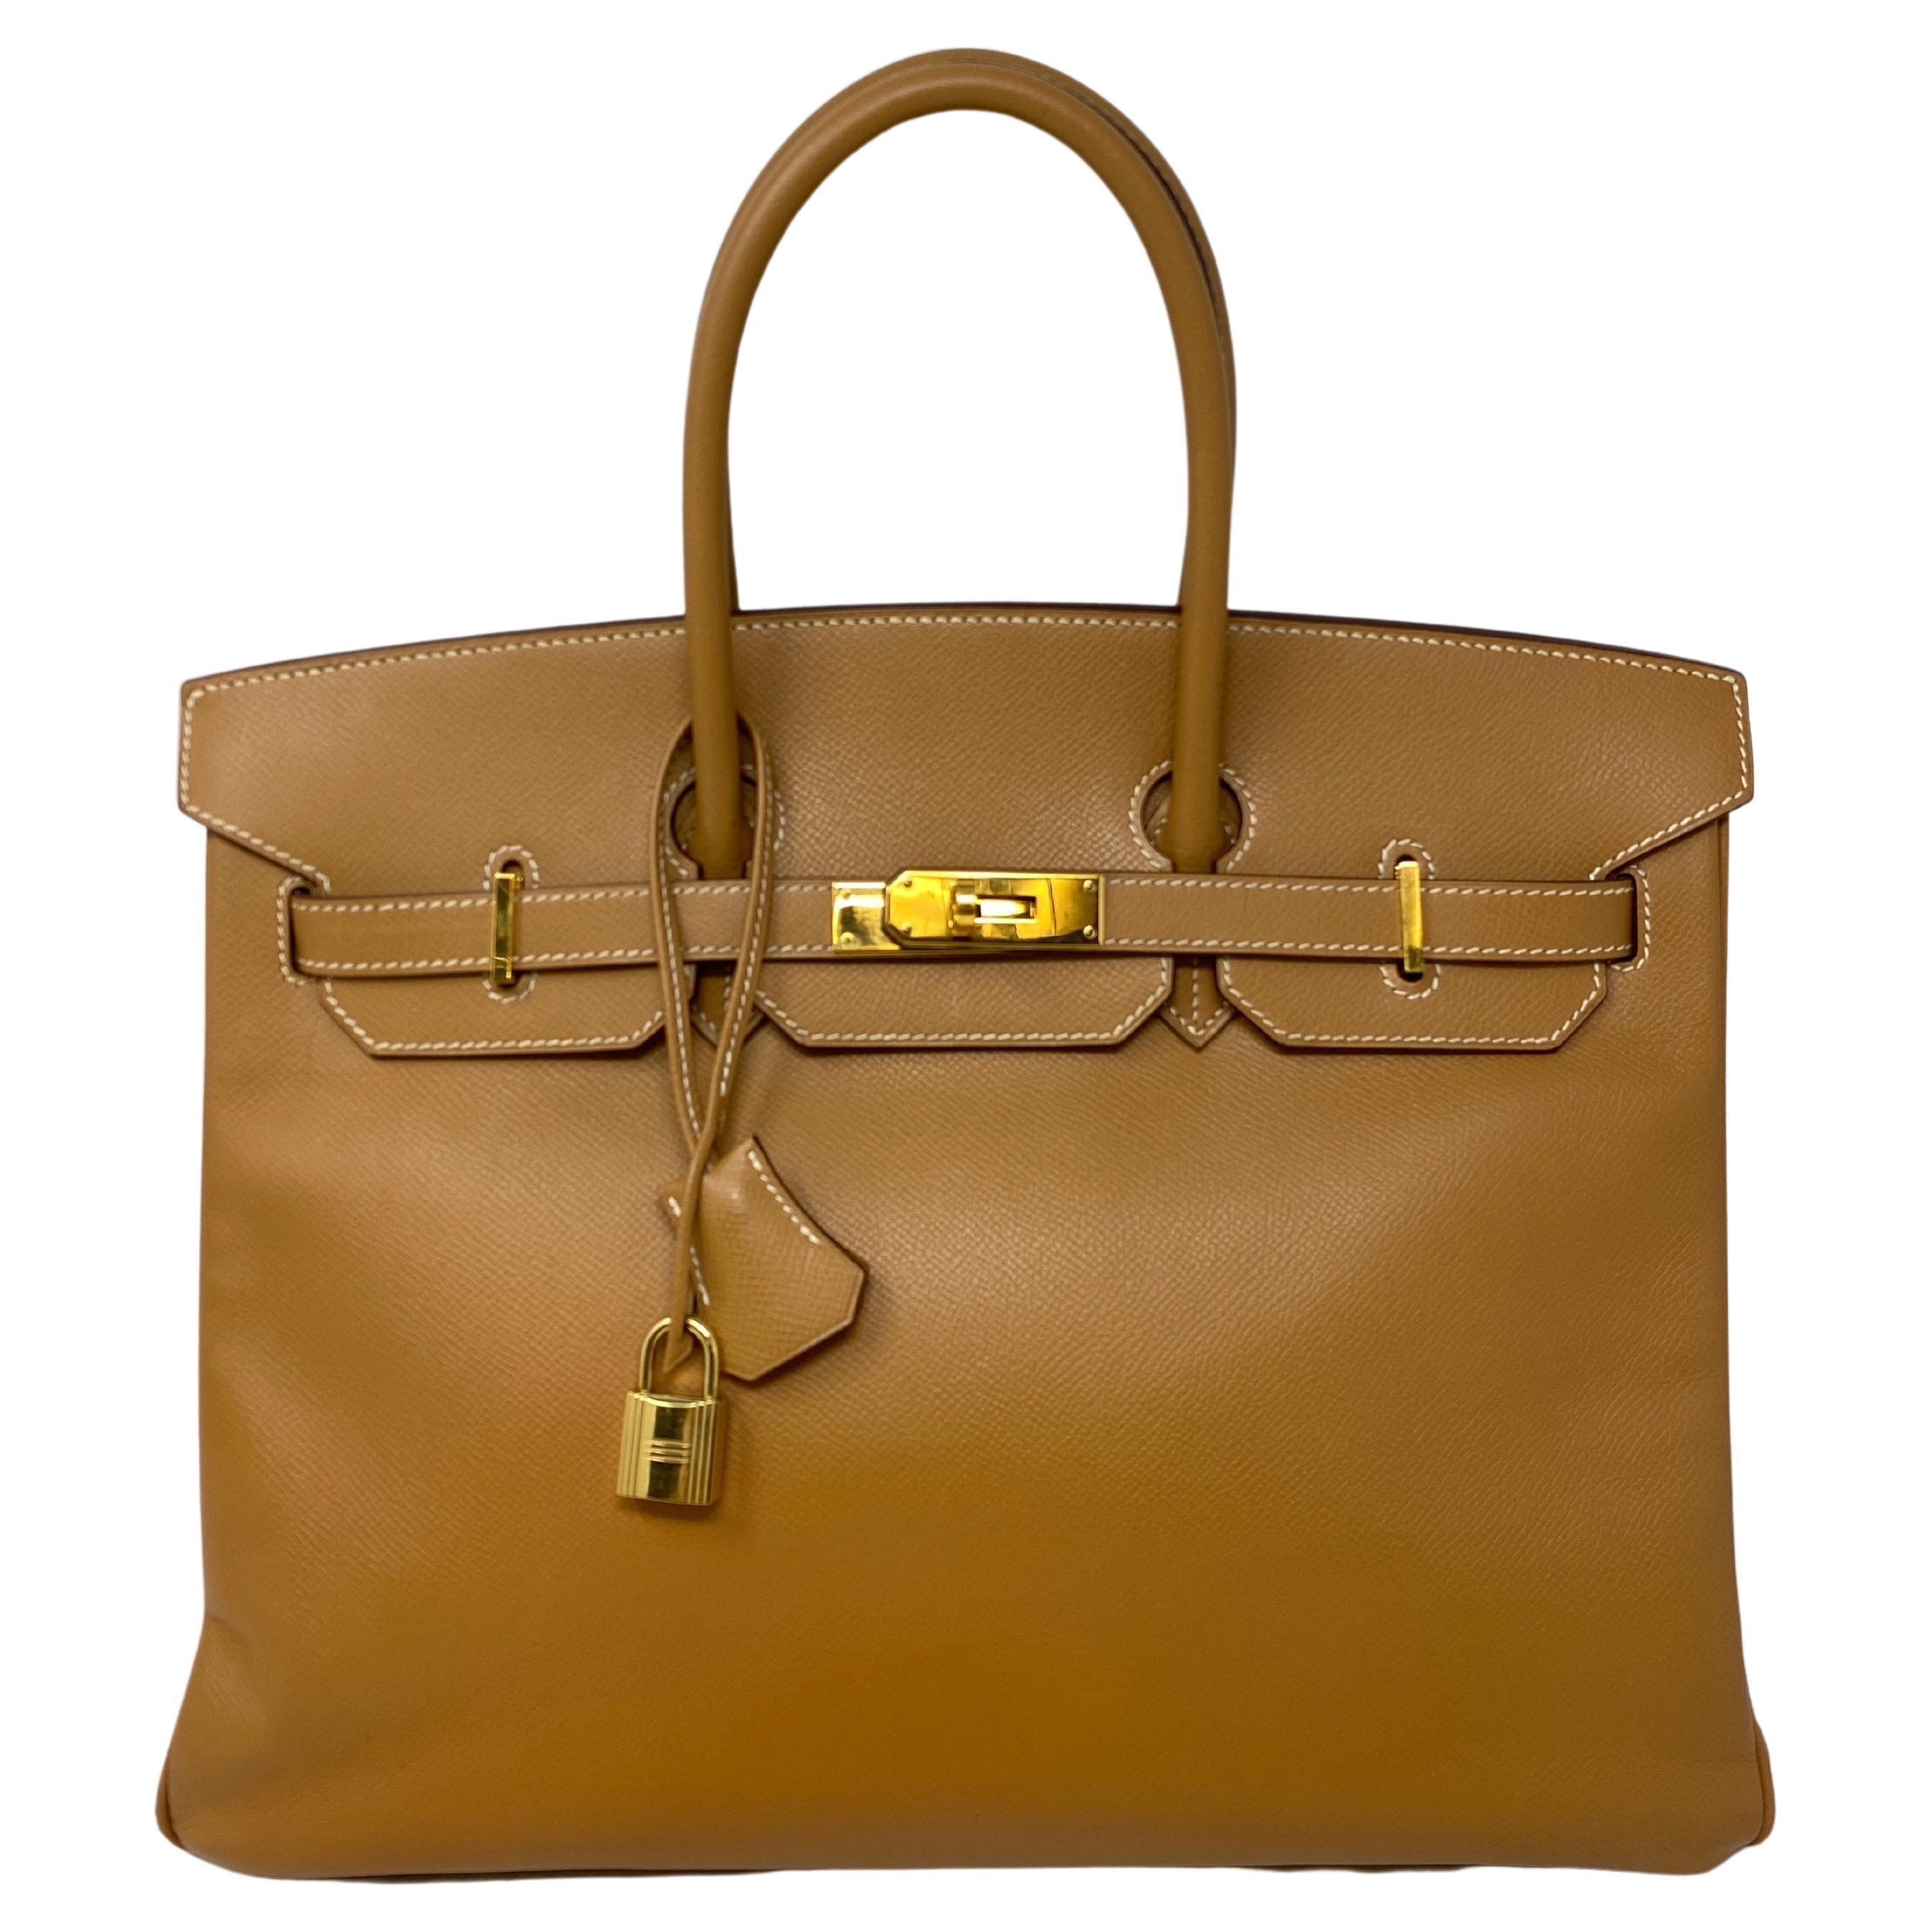 Hermes Natural Tan Birkin 35 Bag. Gold hardware. Light tan color close to gold. Excellent condition. Vintage Courchevel leather. Beautiful Birkin 35 Bag. Great neutral color. Includes clochette, lock, keys, and dust bag. Classic Birkin Bag to invest